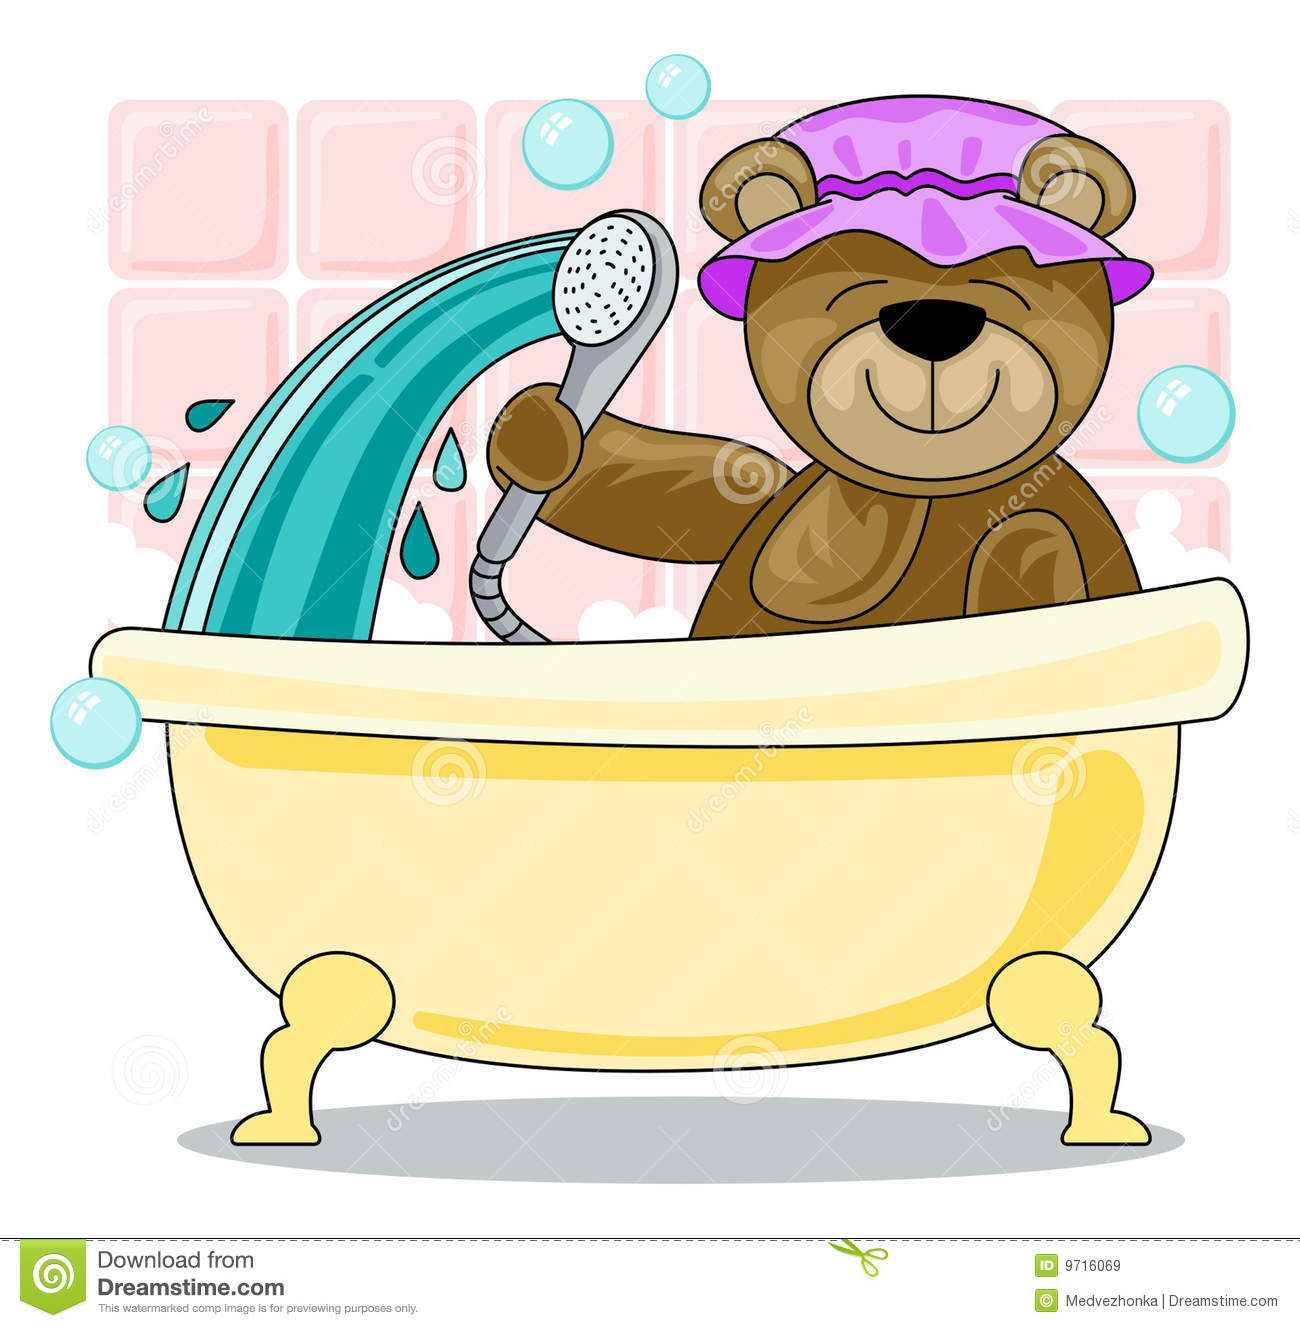 Teddy Bear Showering In Bath Royalty Free Stock Images   Image